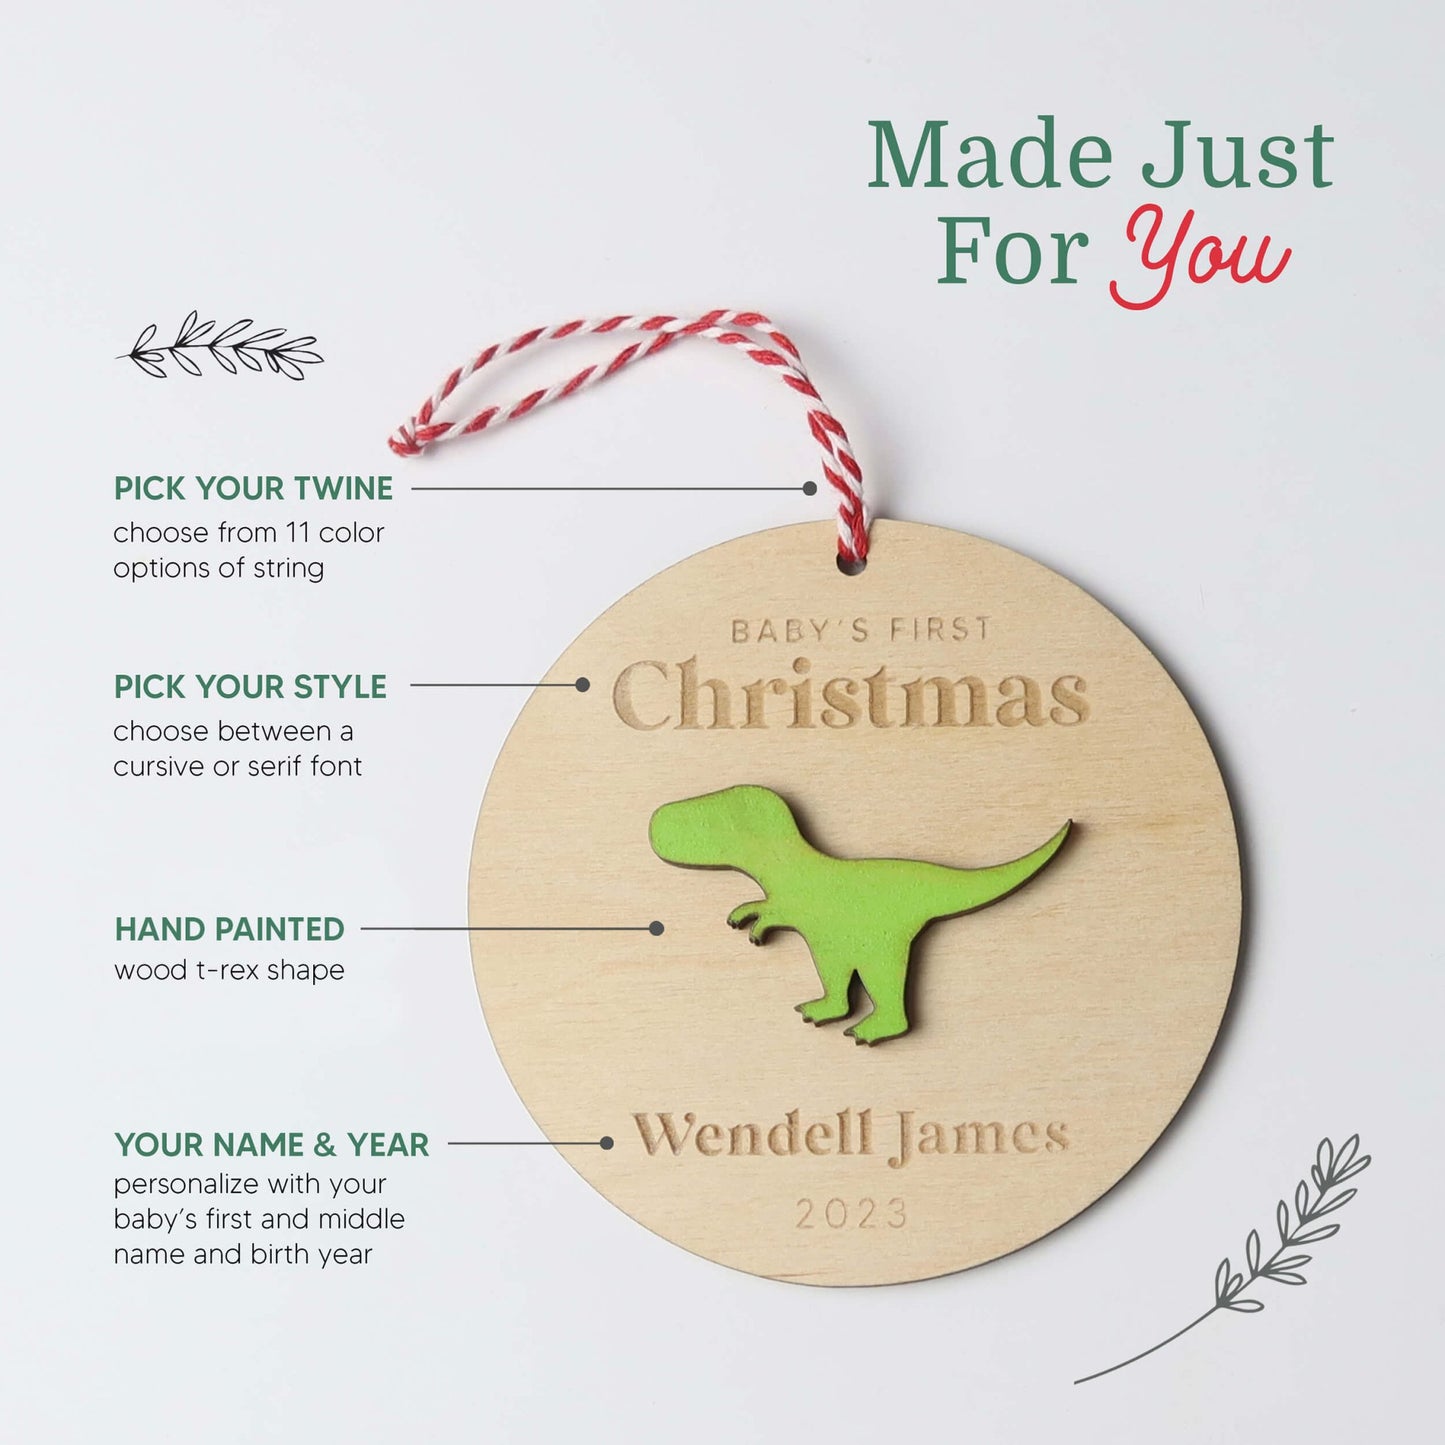 T-Rex Baby's First Christmas Ornament Personalized - Holiday Ornaments - Moon Rock Prints